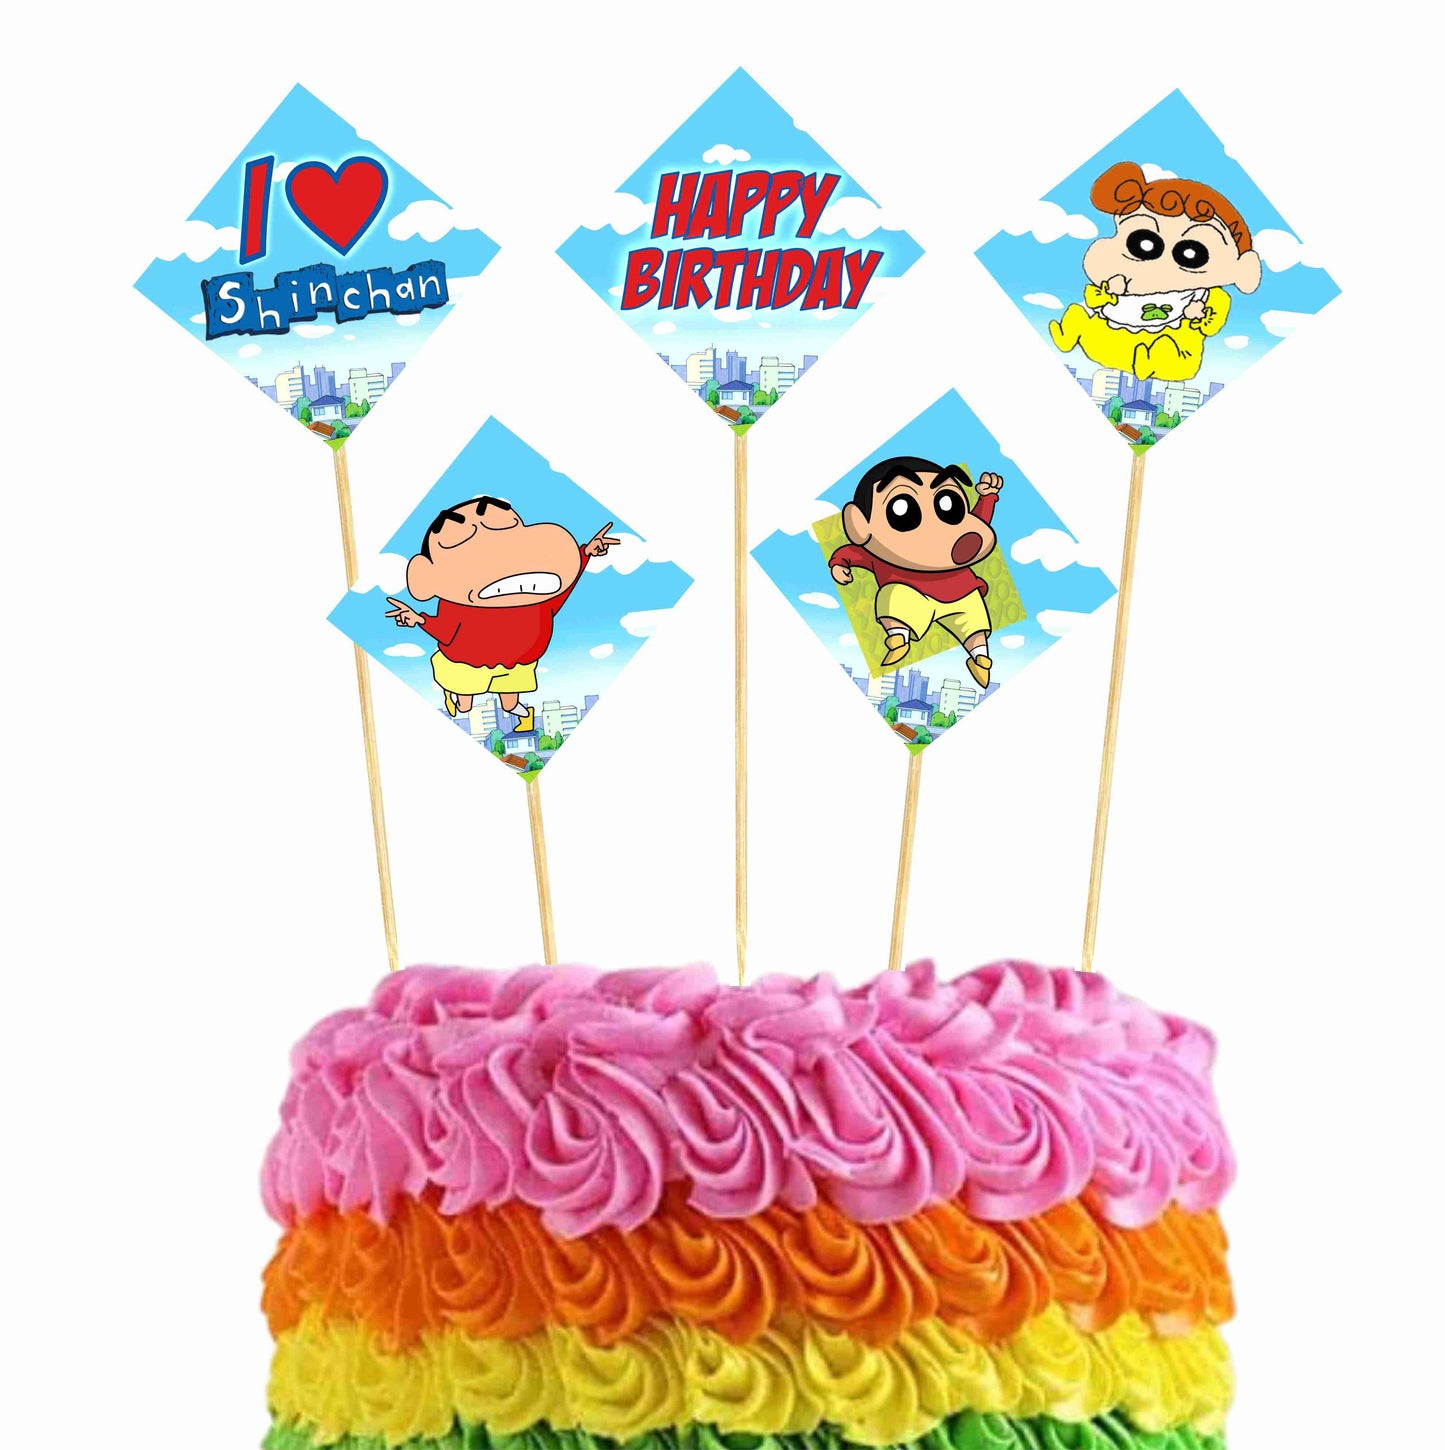 Shinchan Theme Cake Topper Pack of 10 Nos for Birthday Cake Decoration Theme Party Item For Boys Girls Adults Birthday Theme Decor